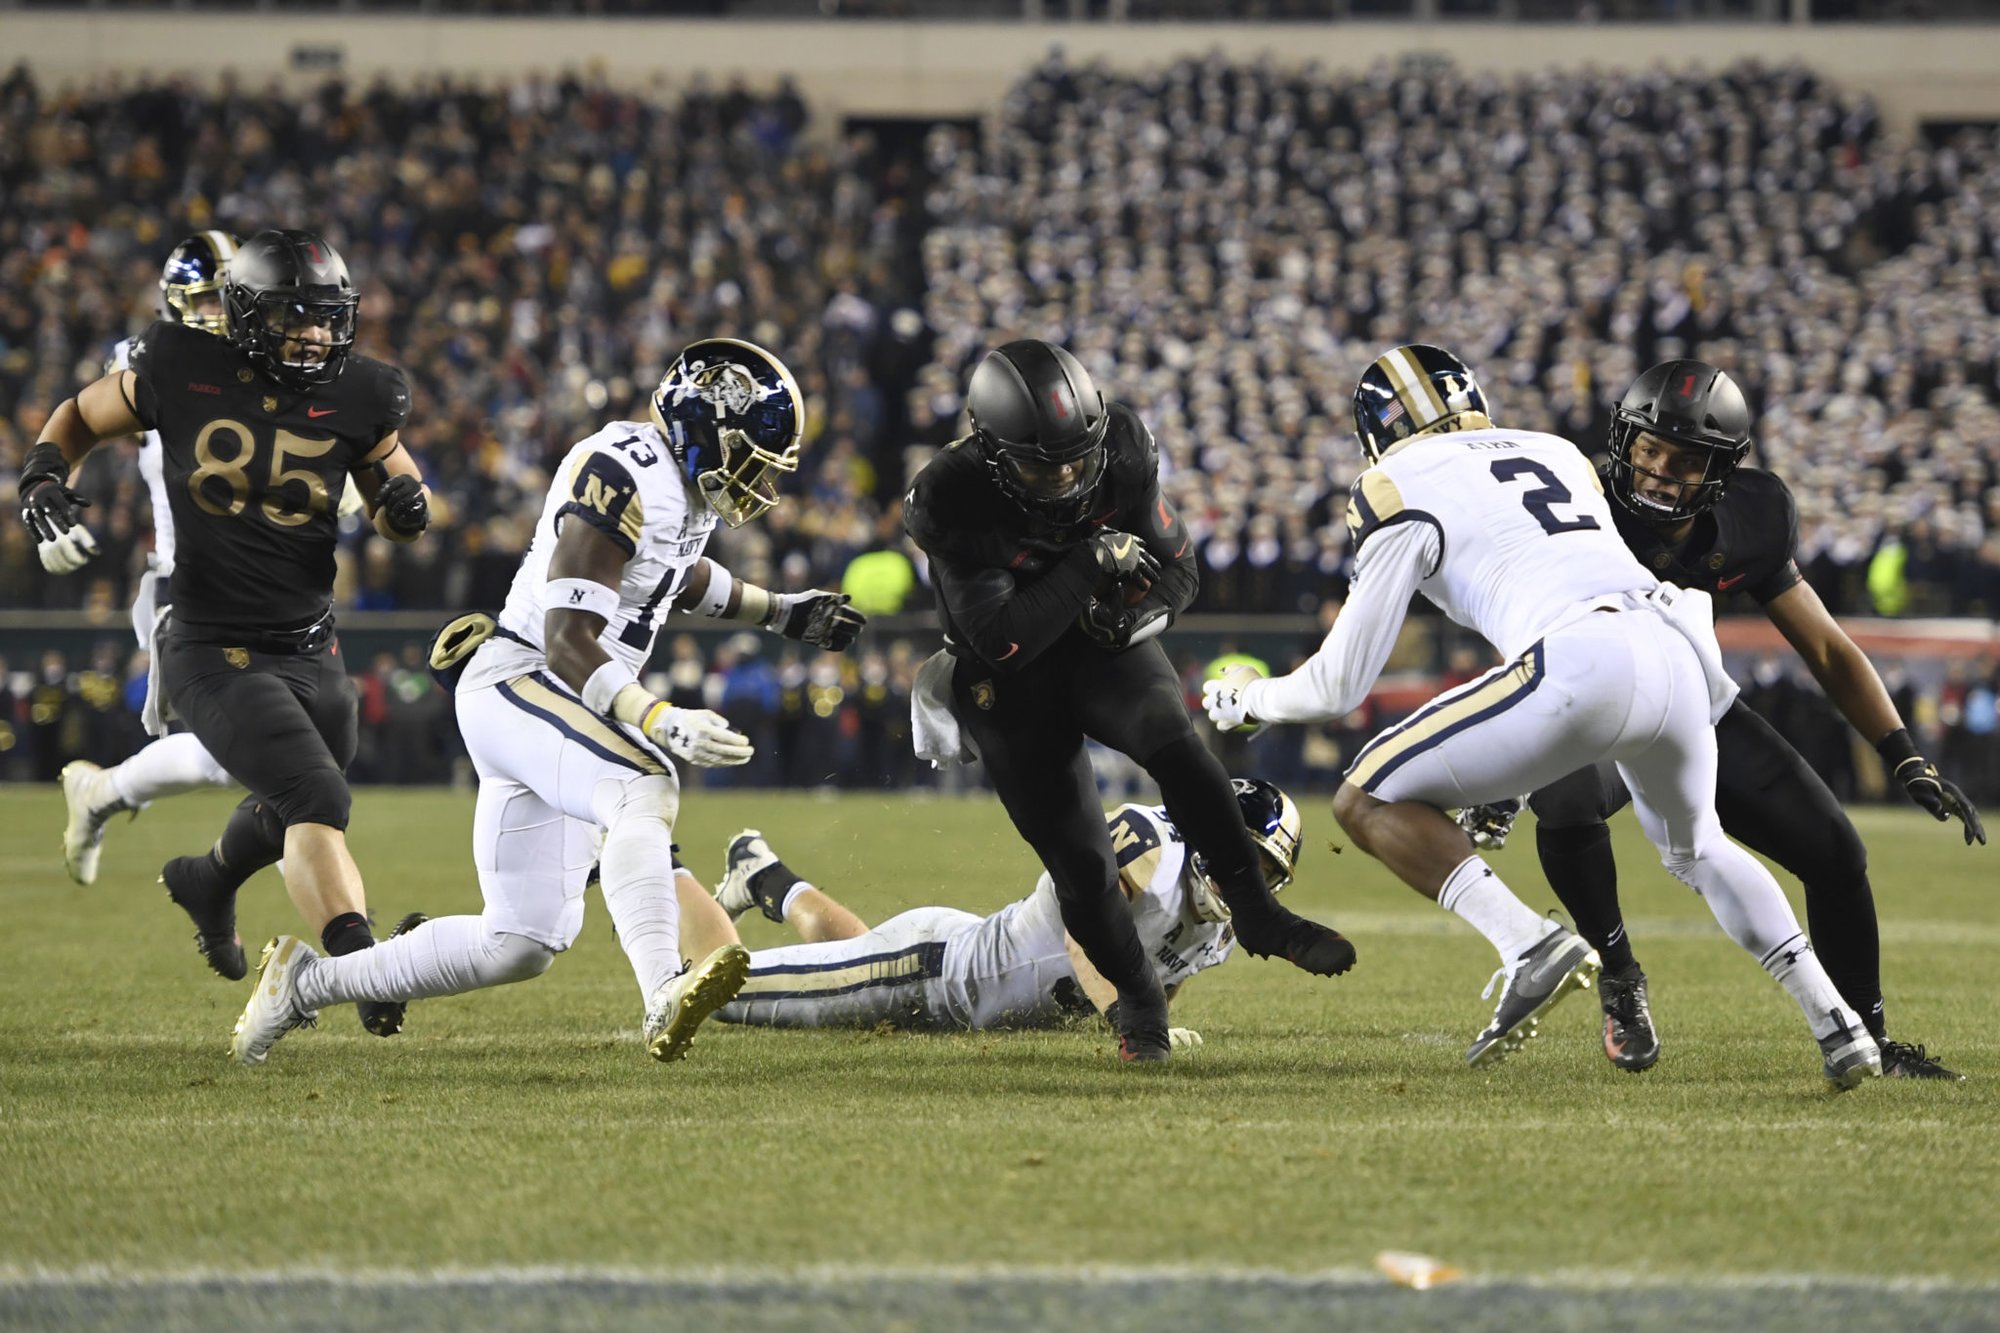 PHILADELPHIA, PENNSYLVANIA – DECEMBER 08: Kelvin Hopkins Jr. #8 of the Army Black Knights drives toward the end zone against Juan Hailey #13 and Jarid Ryan #2 of the Navy Midshipmen during the third quarter of the game at Lincoln Financial Field on December 08, 2018 in Philadelphia, Pennsylvania. (Photo by Sarah Stier/Getty Images)